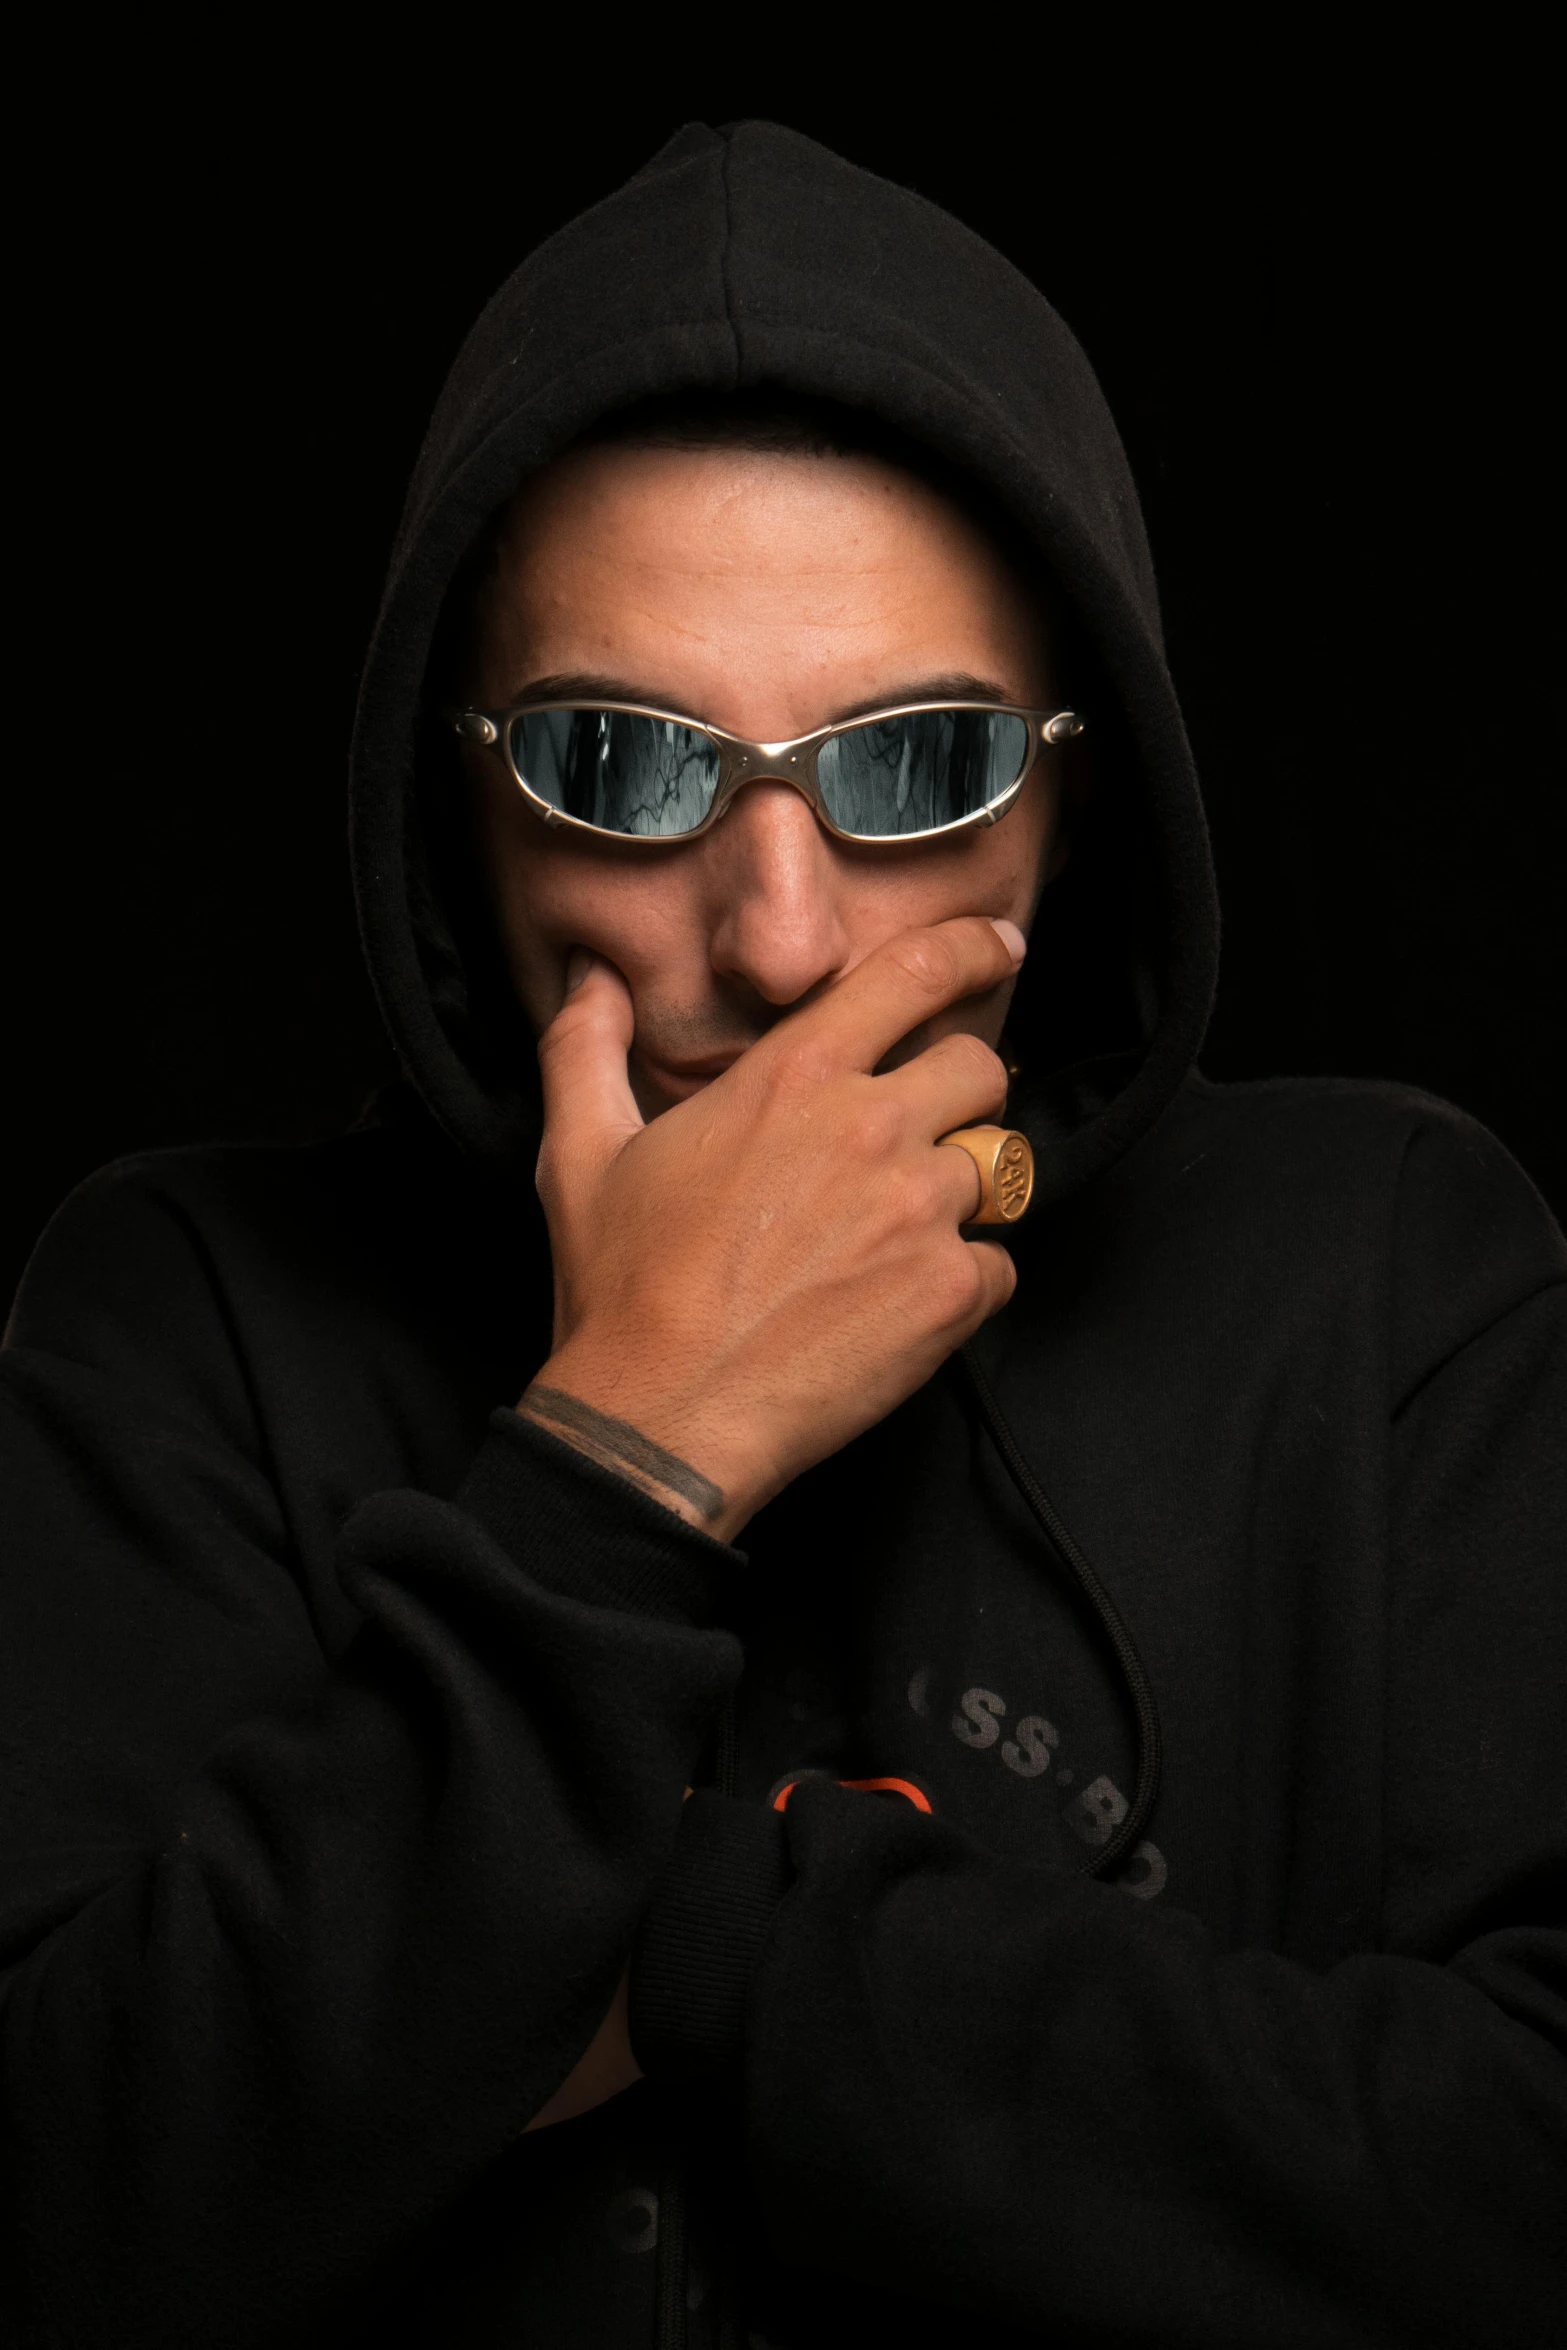 a man wearing sunglasses covers his mouth as he puts his hand on his face